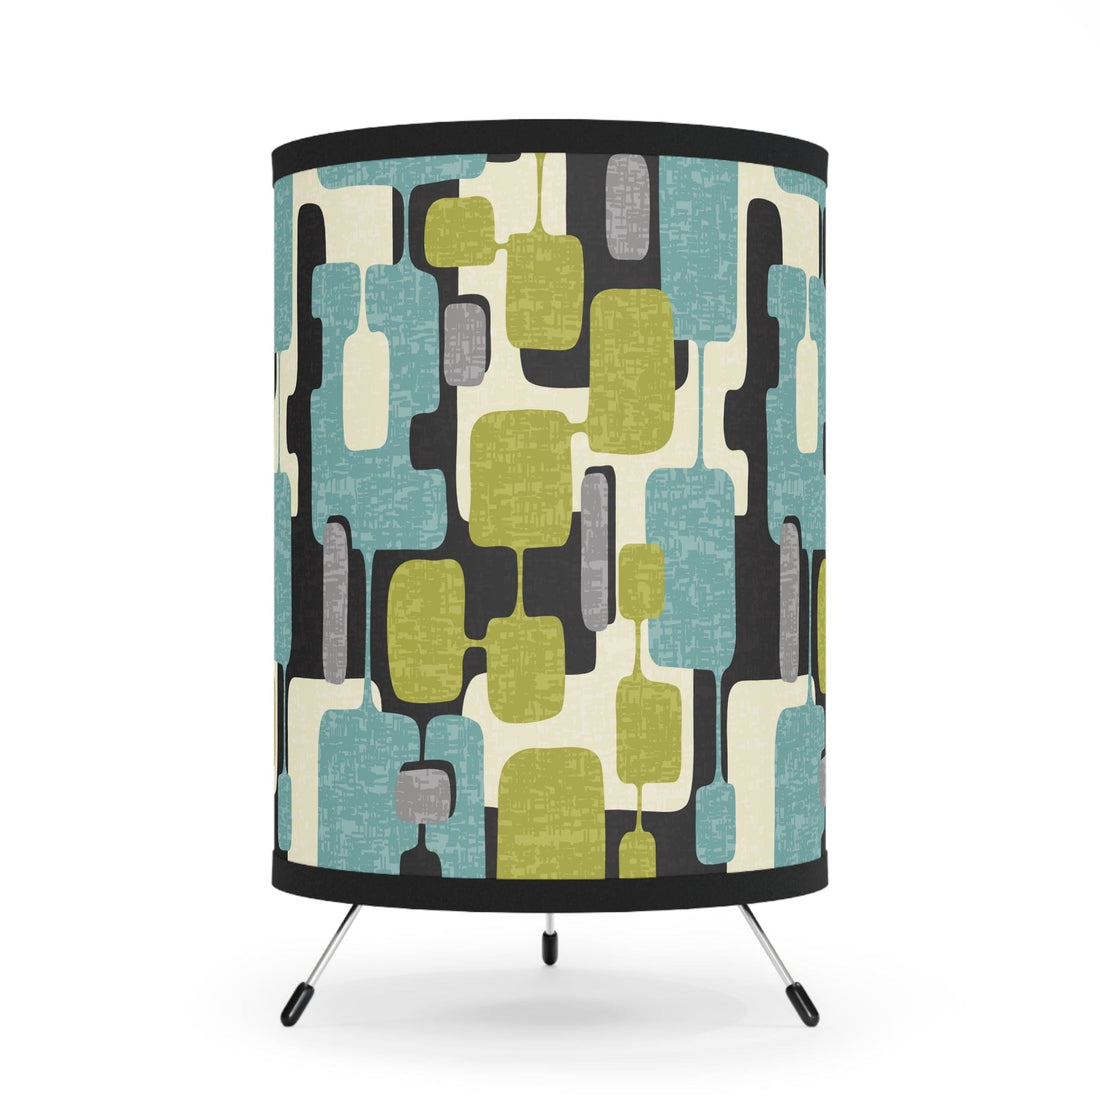 Kate McEnroe New York Mid Century Modern Abstract Tripod Lamp, Retro Teal, Lime Green, Gray, Black MCM Desk Lamp, Vintage Style Geometric Accent LampLamps23244726713903750746